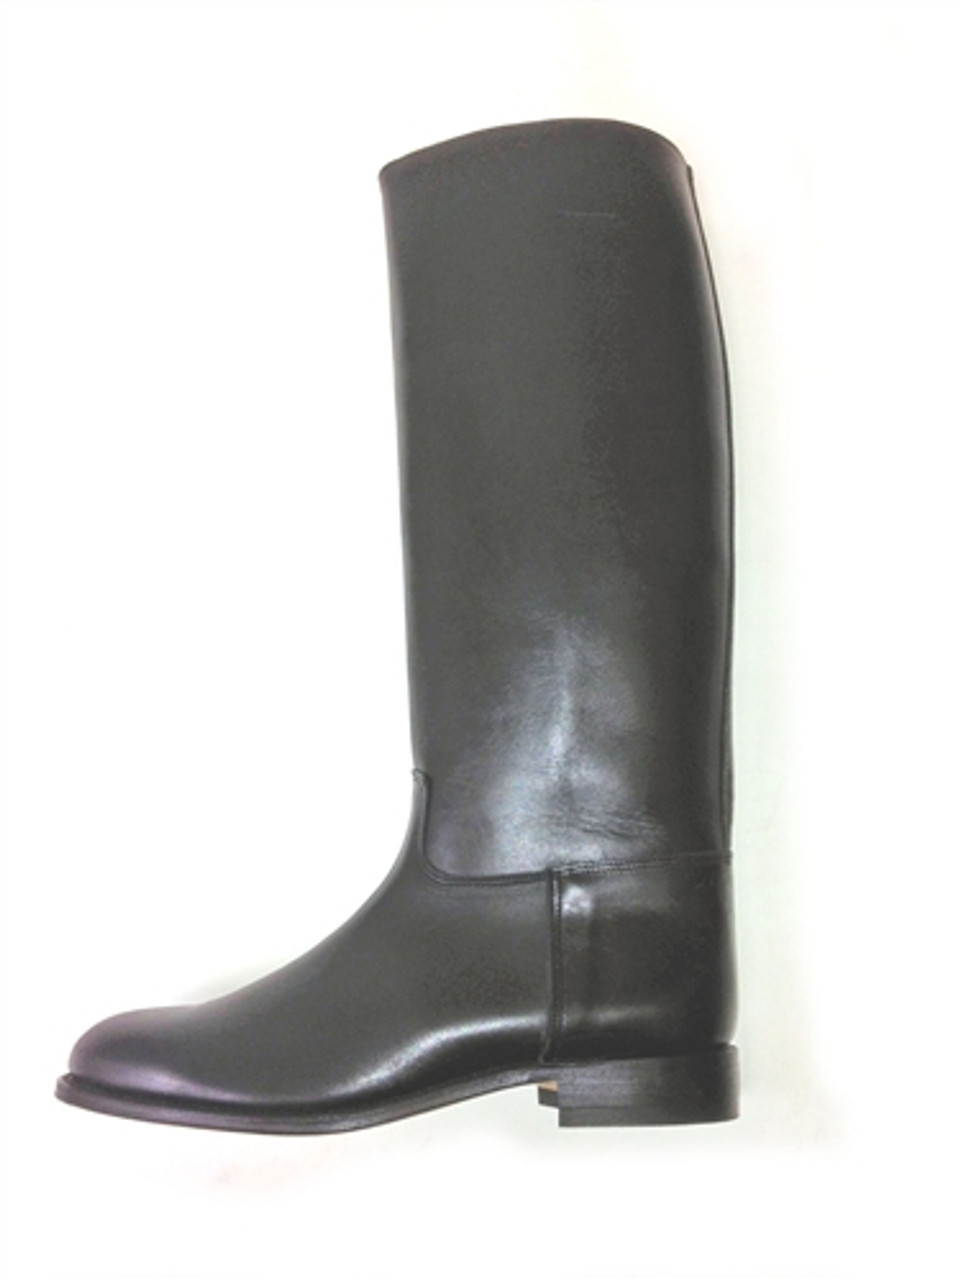 100% leather Riding Boots from Hessen Antique